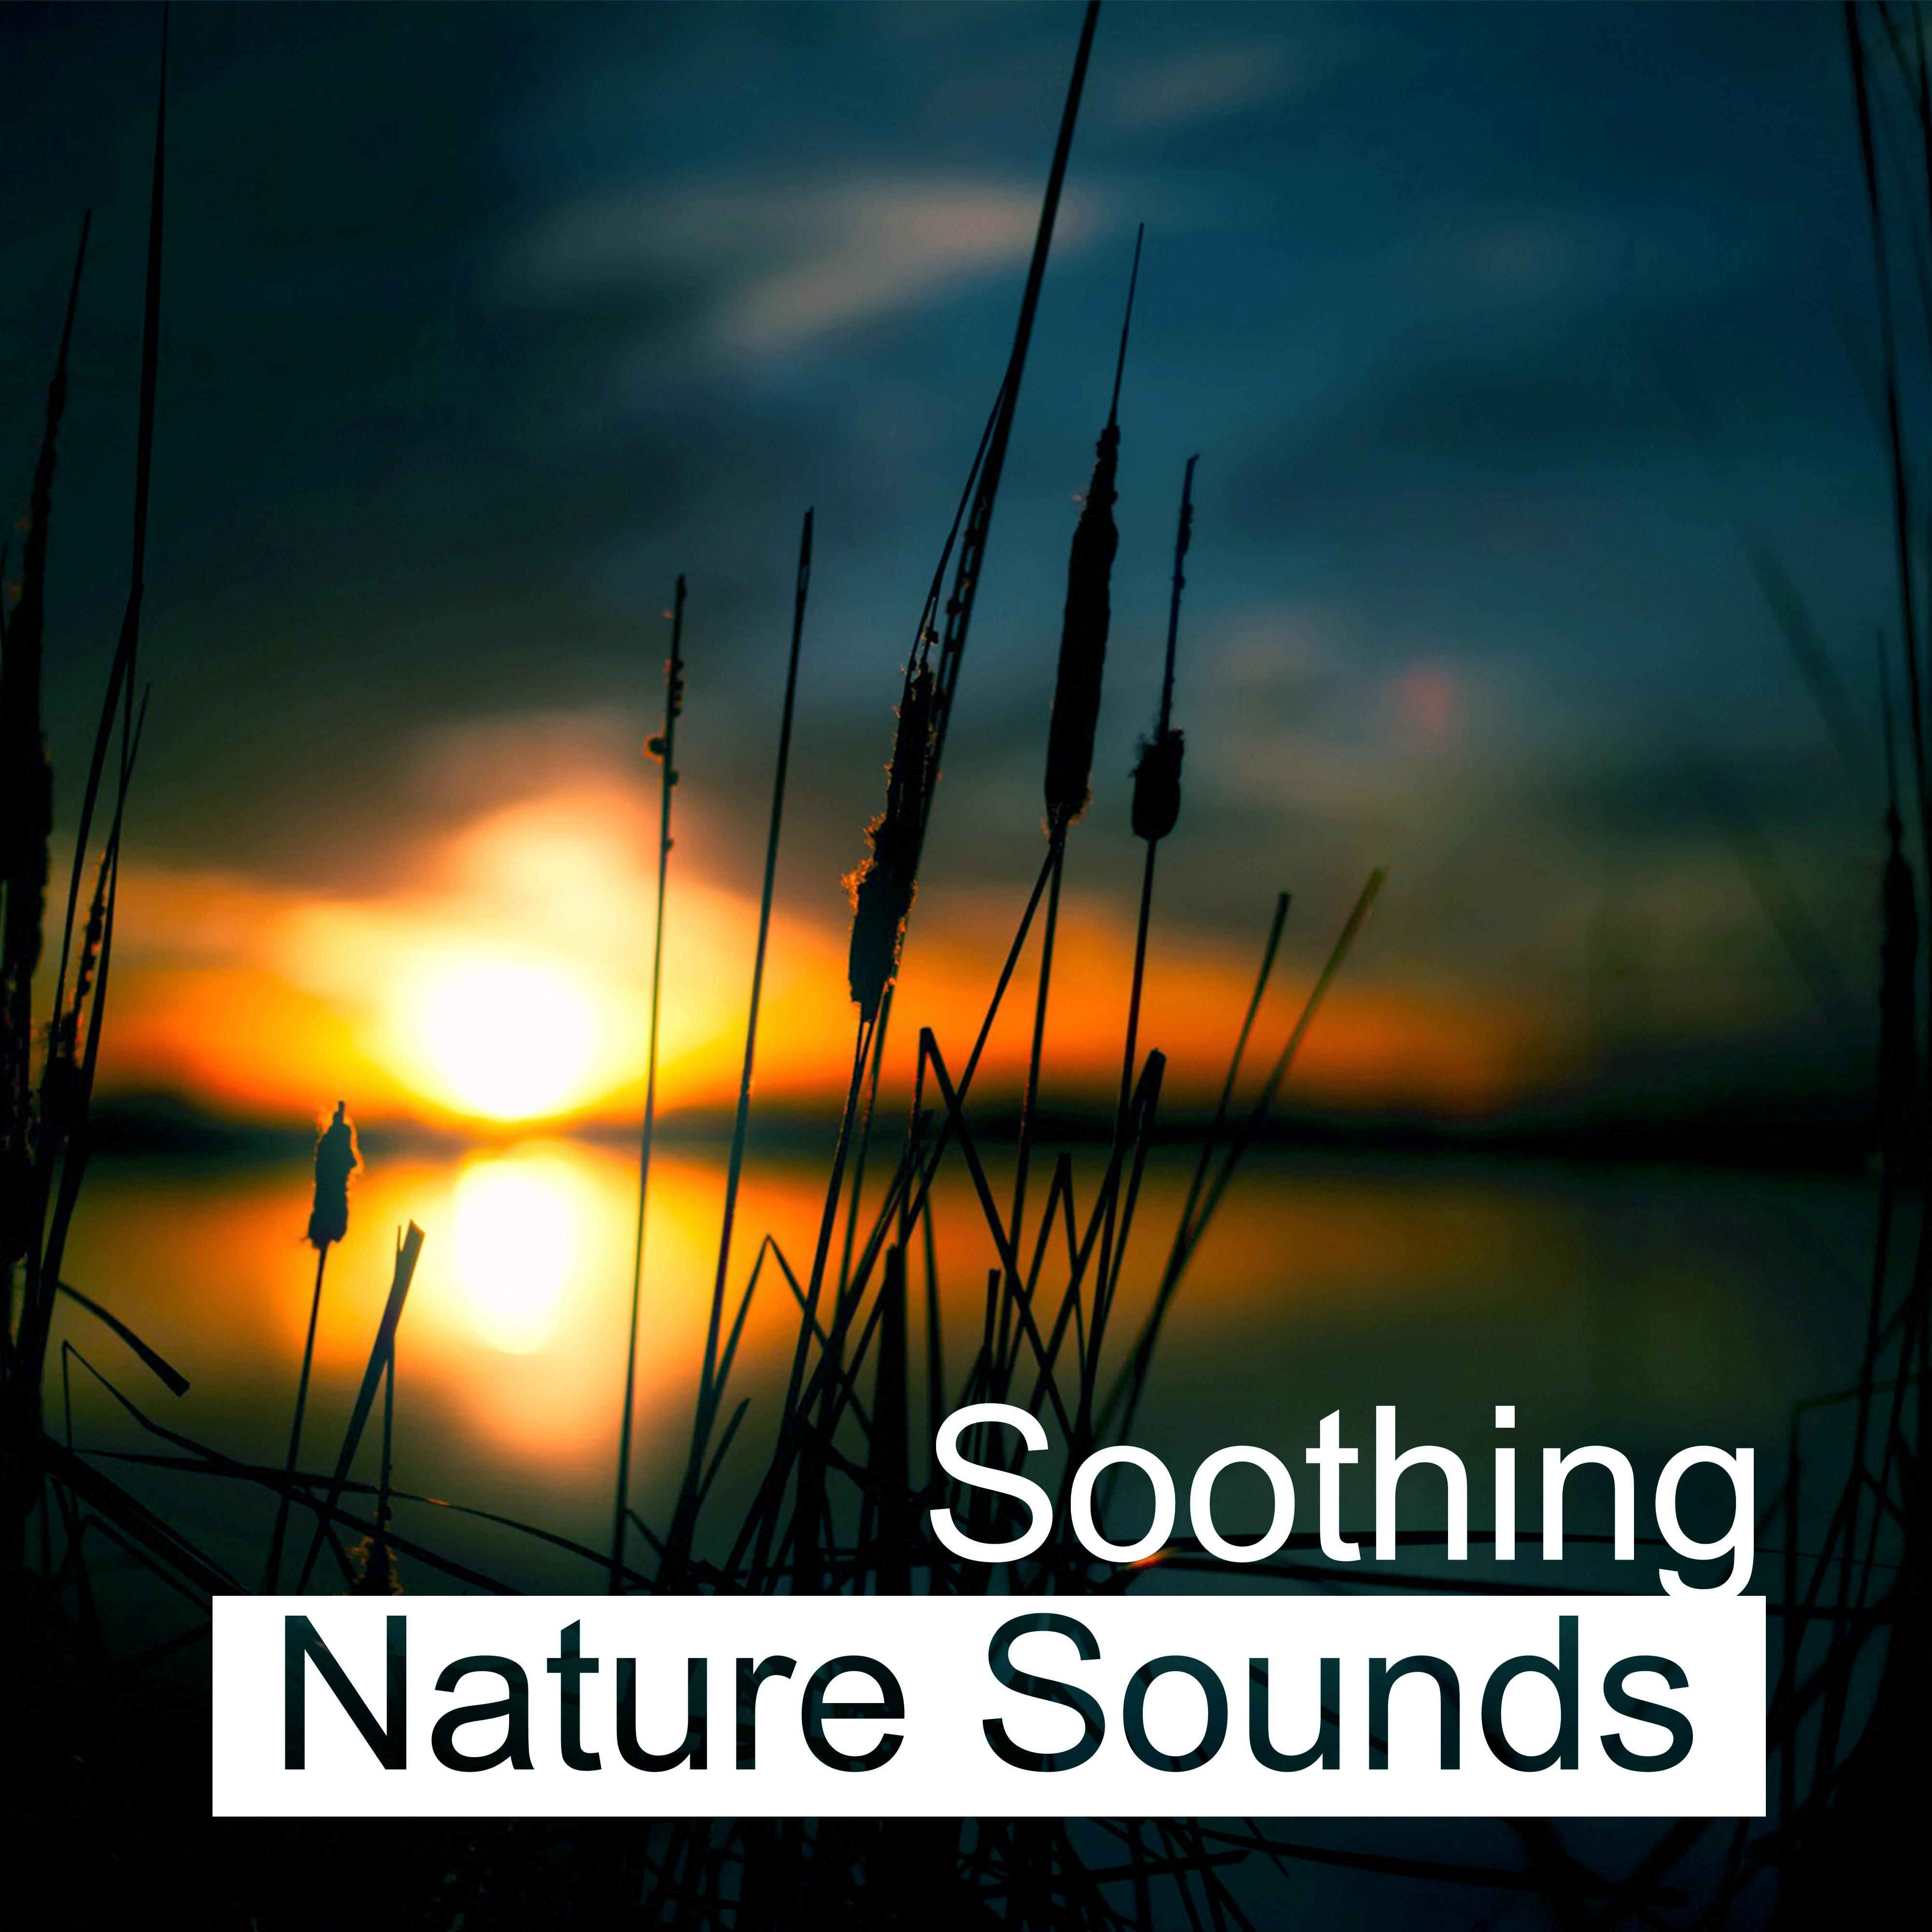 Soothing Nature Sounds – Easy Way to Relax, Rest with Nature Music, Calm Down, Mind Peace